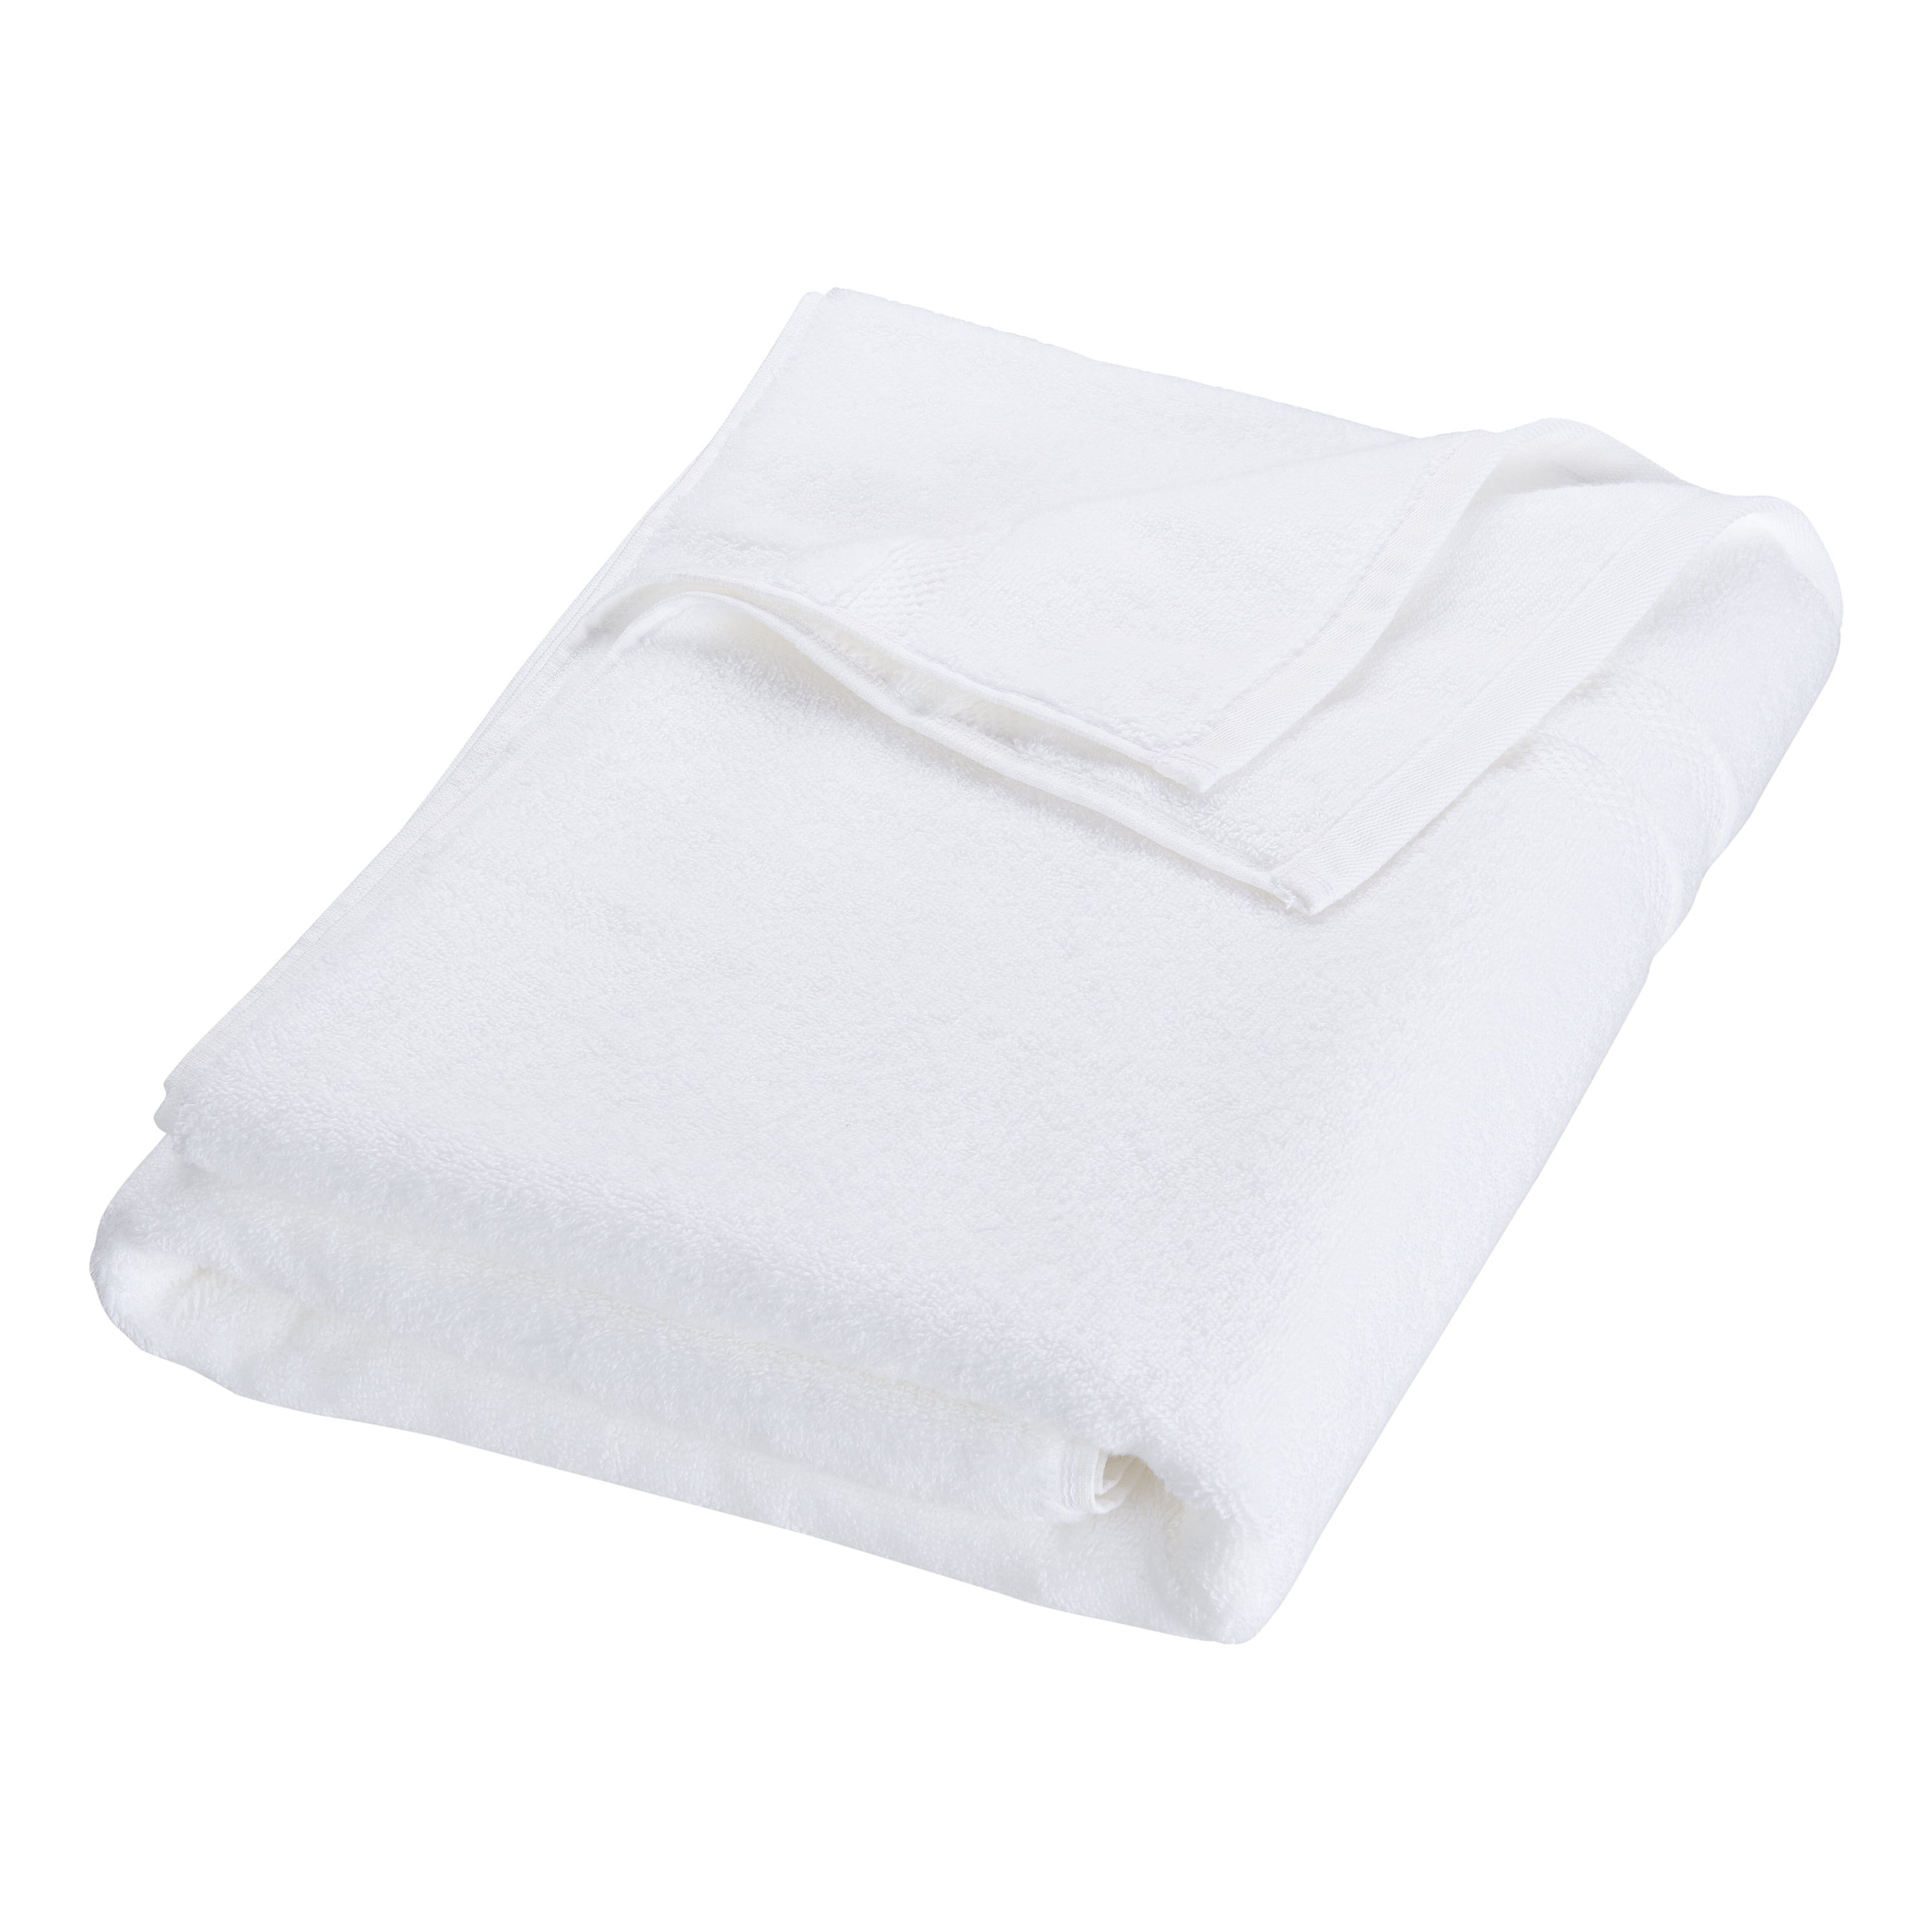 Hotel Style Turkish Cotton Bath Towel Collection Solid Print White Bath Sheet